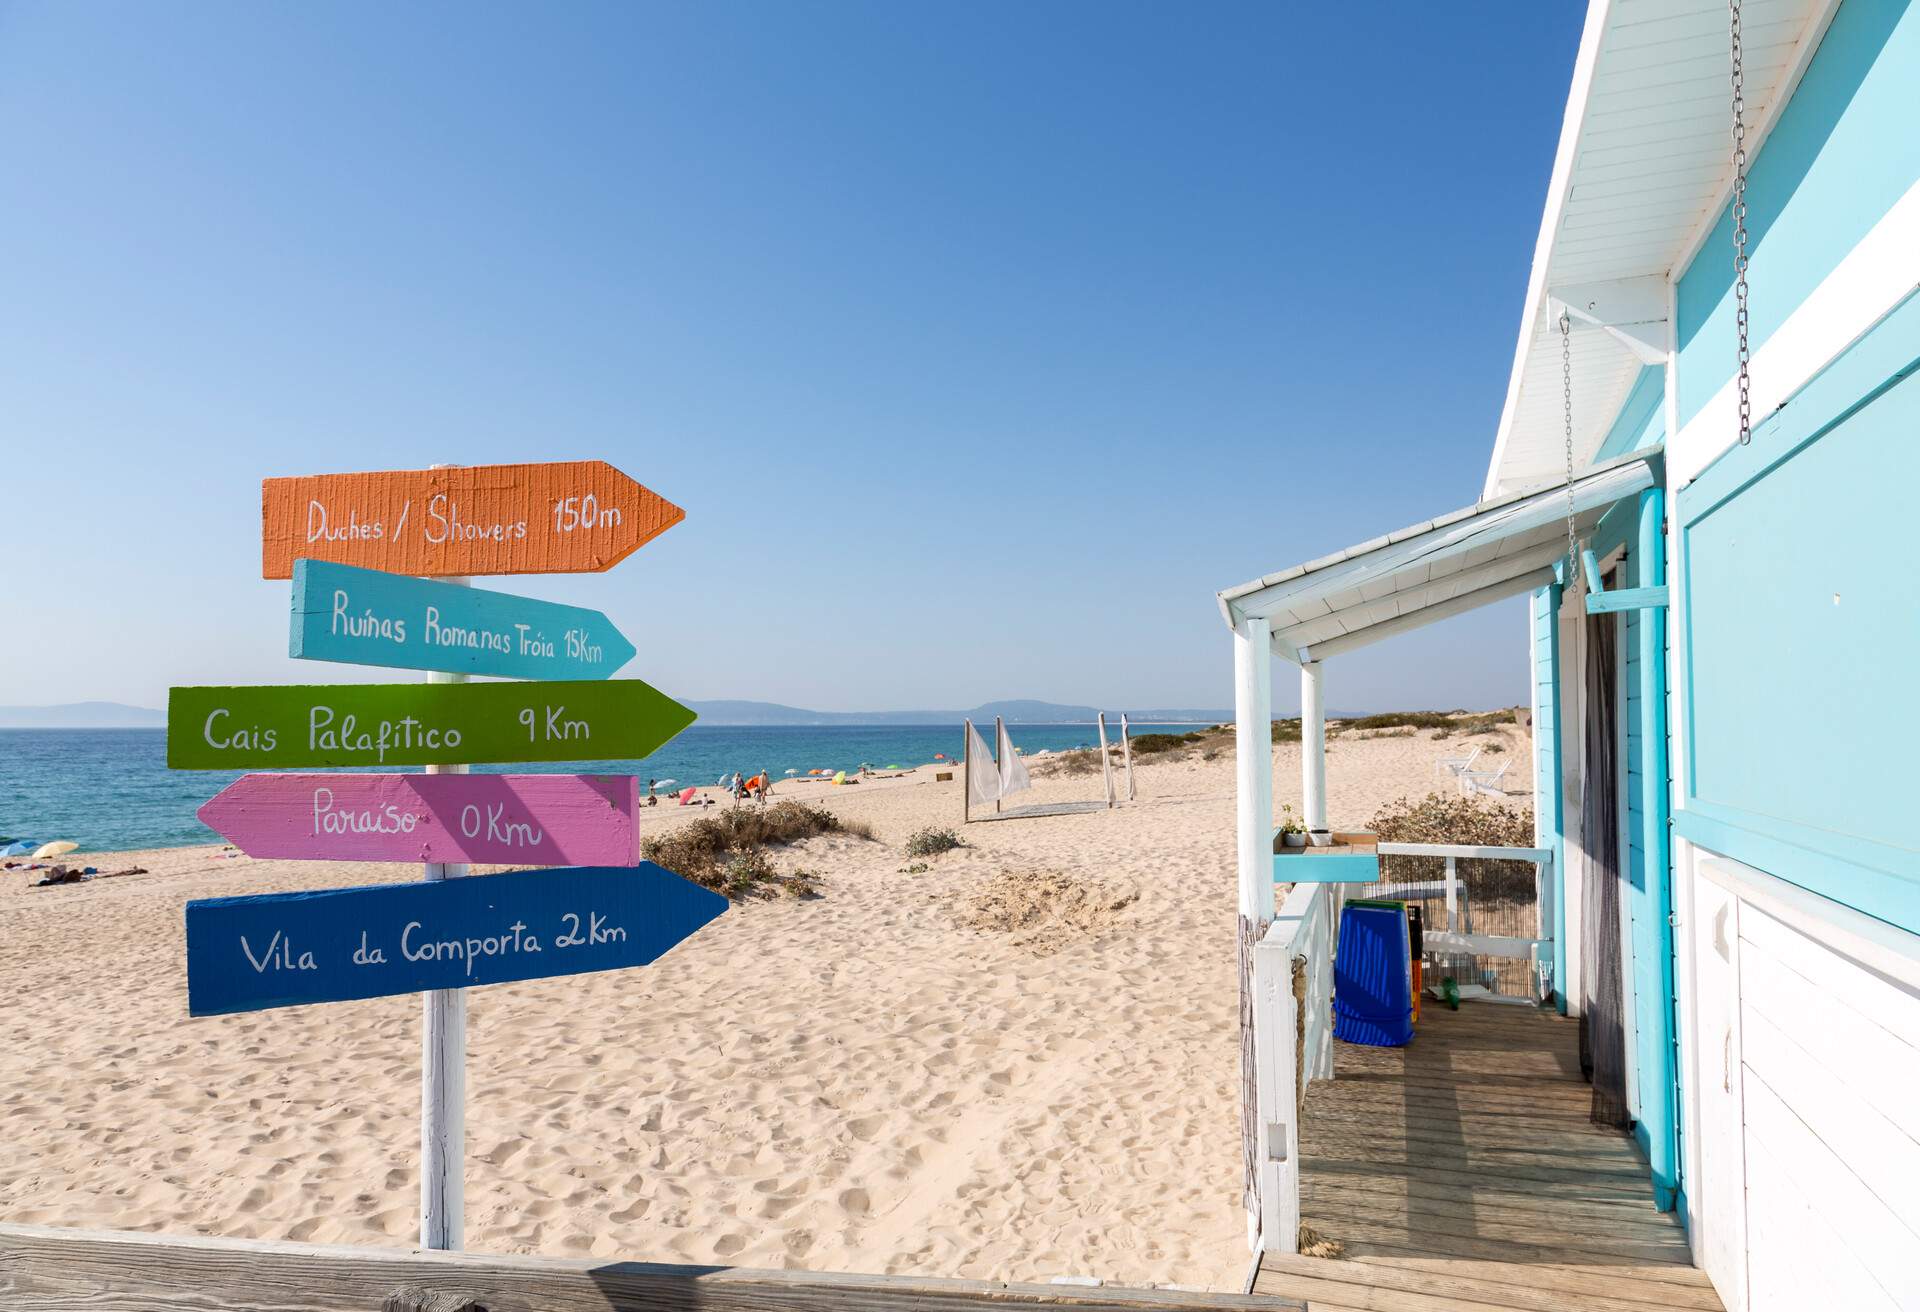 A wooden white and blue house and a colourful street sign on the sandy shore of a tranquil beach.